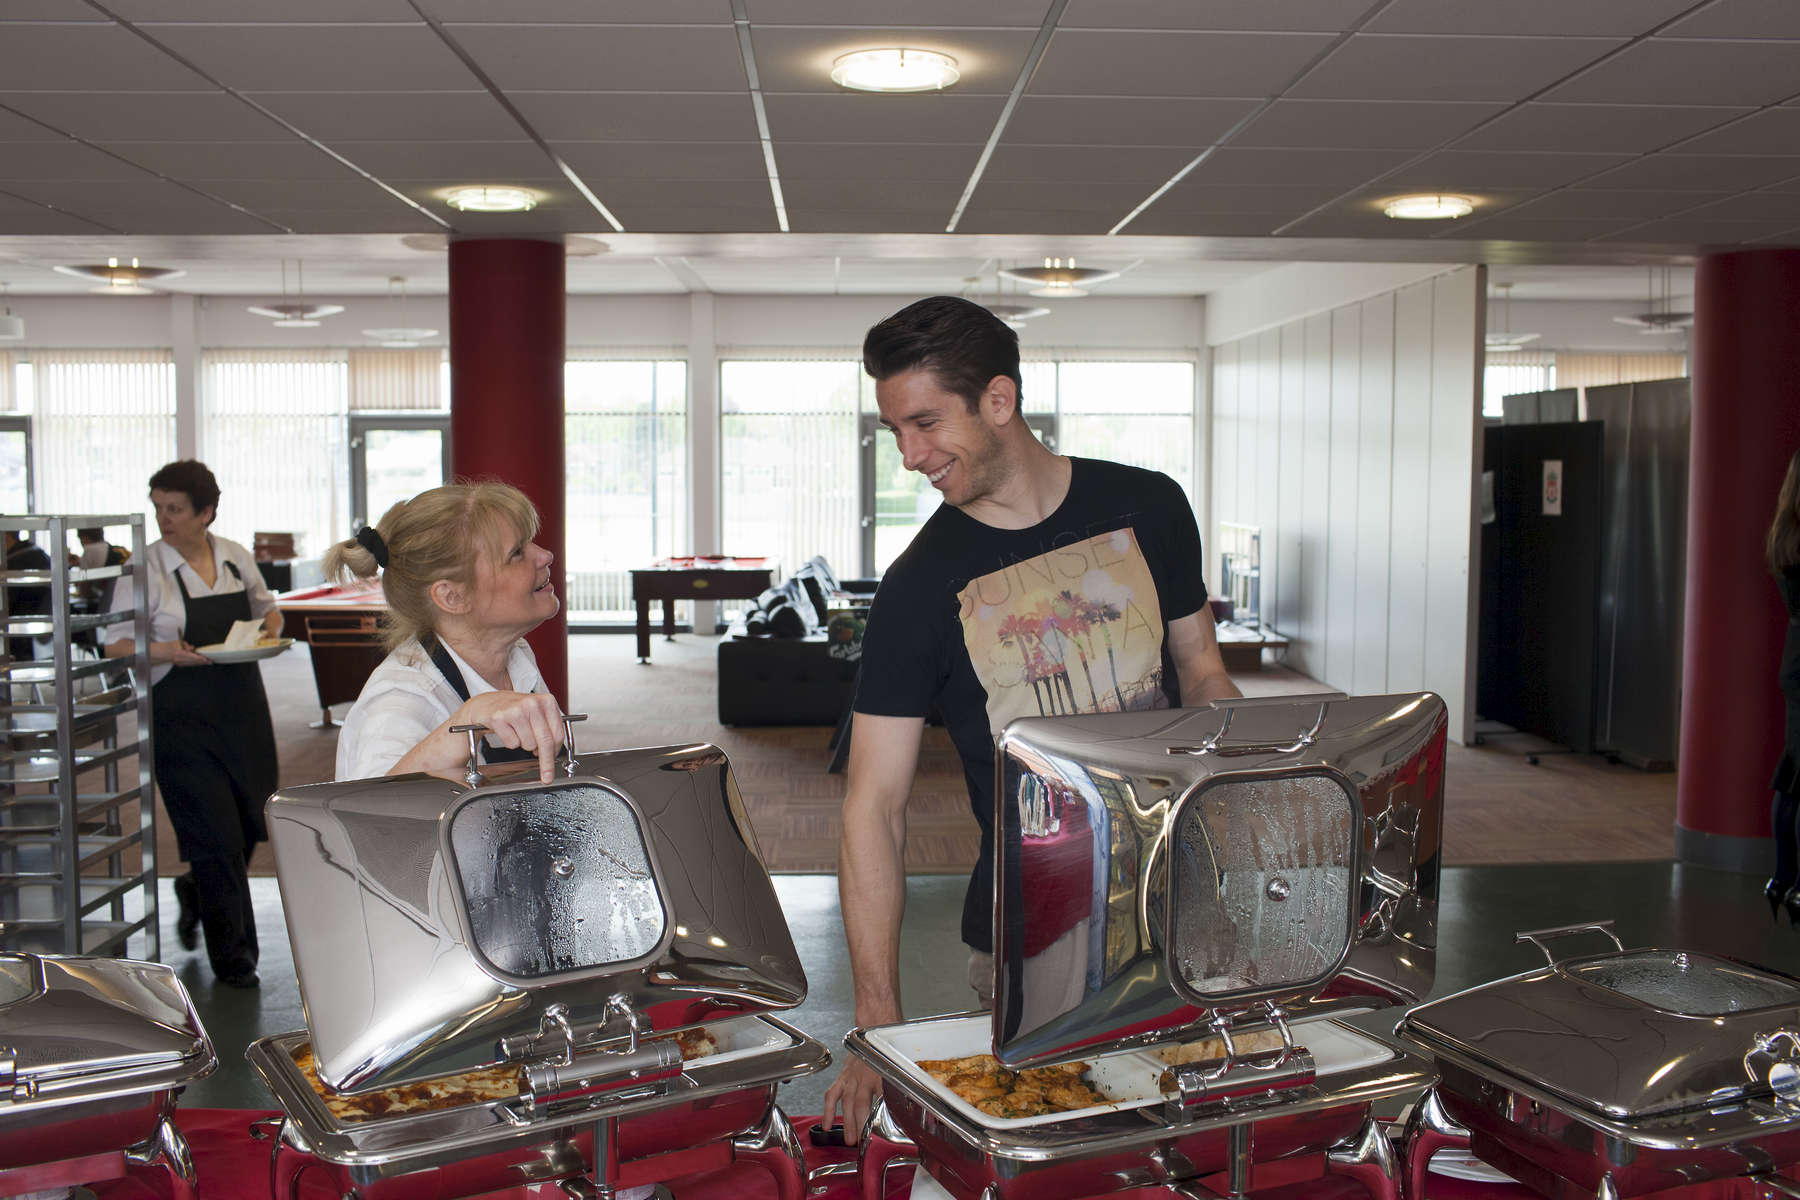 Liverpool FC player Brad Jones chats with canteen staff on training day at Melwood.Melwood is the Liverpool FC training ground, located in the West Derby area of Liverpool. It is seperate from the Liverpool Academy, which is based in Kirkby.Melwood was redeveloped in the early 2000′s with large input from then-manager Gerard Houllier and now features some of the best facilities in Europe. It has been the club’s training ground since the fifties and was previously transformed into a top class facility by Bill Shankly.Facilities include sythetic pitches, rehabilitation rooms, press and meeting rooms, gymnasium, swimming pool, restaurant and recreational facilities.